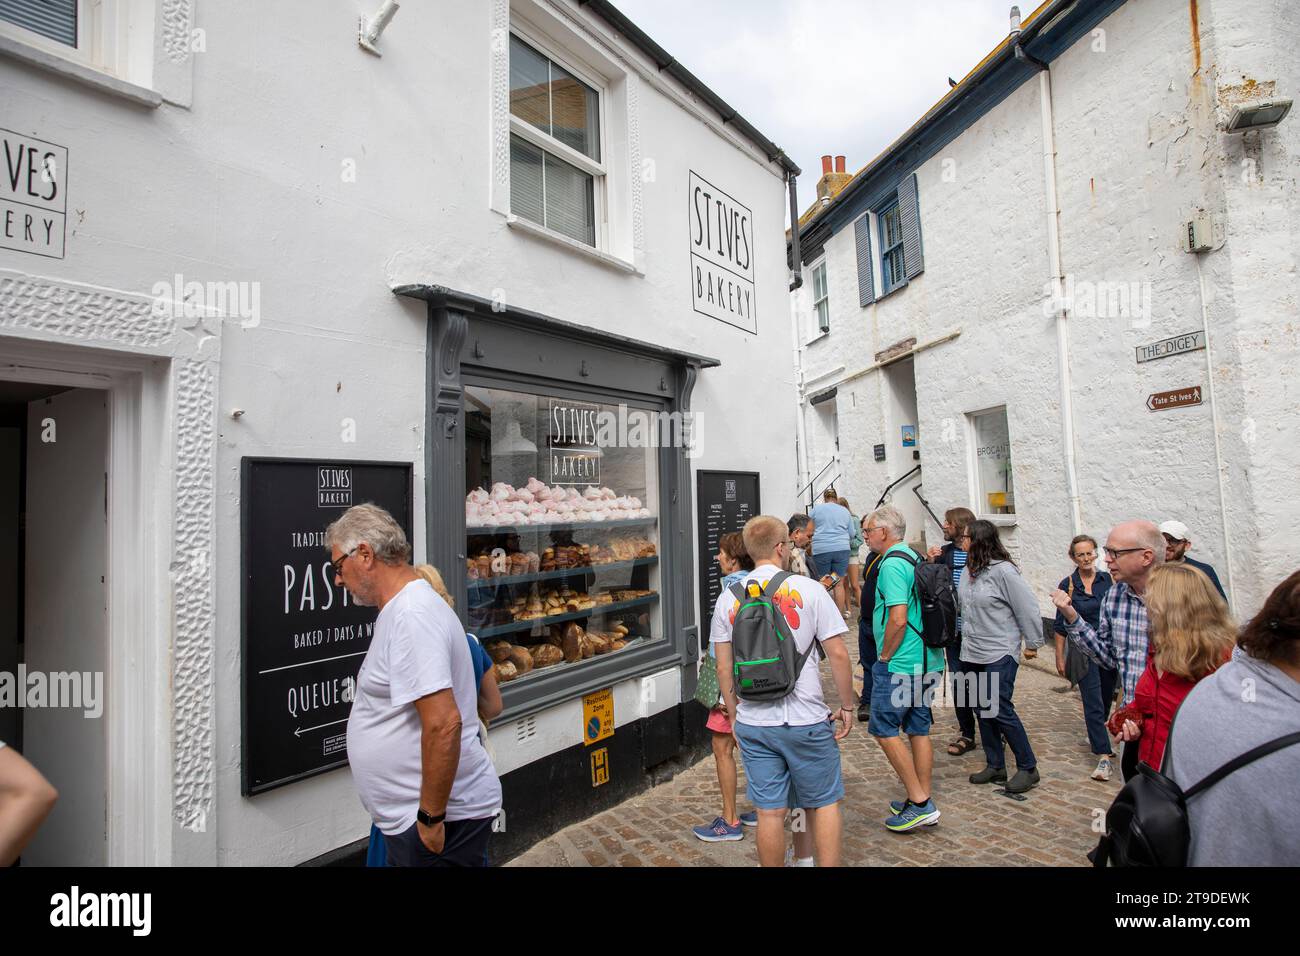 St Ives bakery selling bread and pasties, St Ives town centre,Cornwall,England,UK,2023 Stock Photo